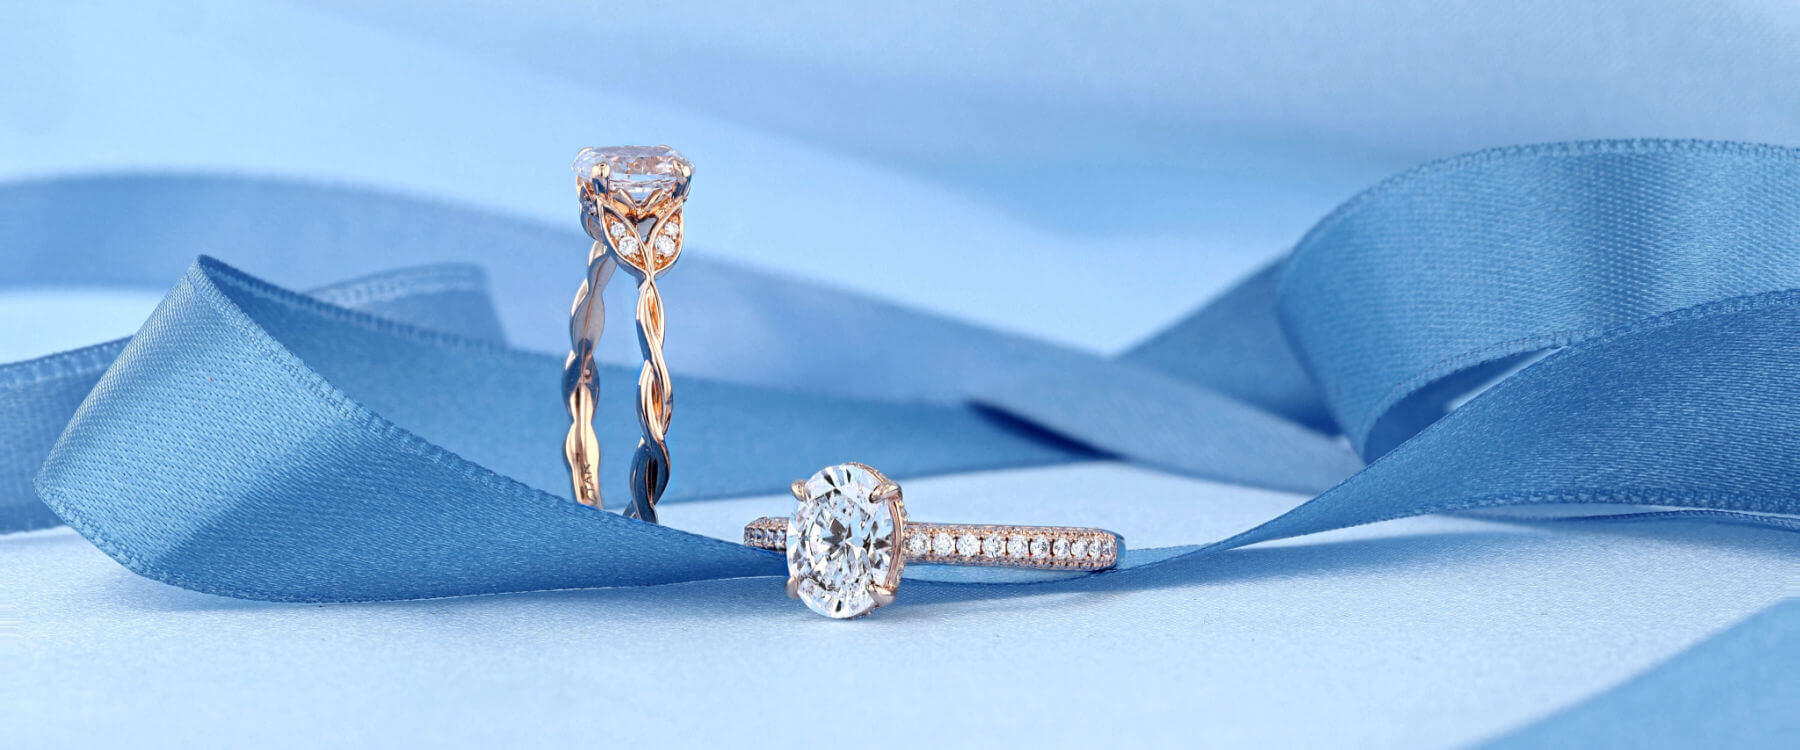 Two diamond engagement rings shown off with a blue ribbon